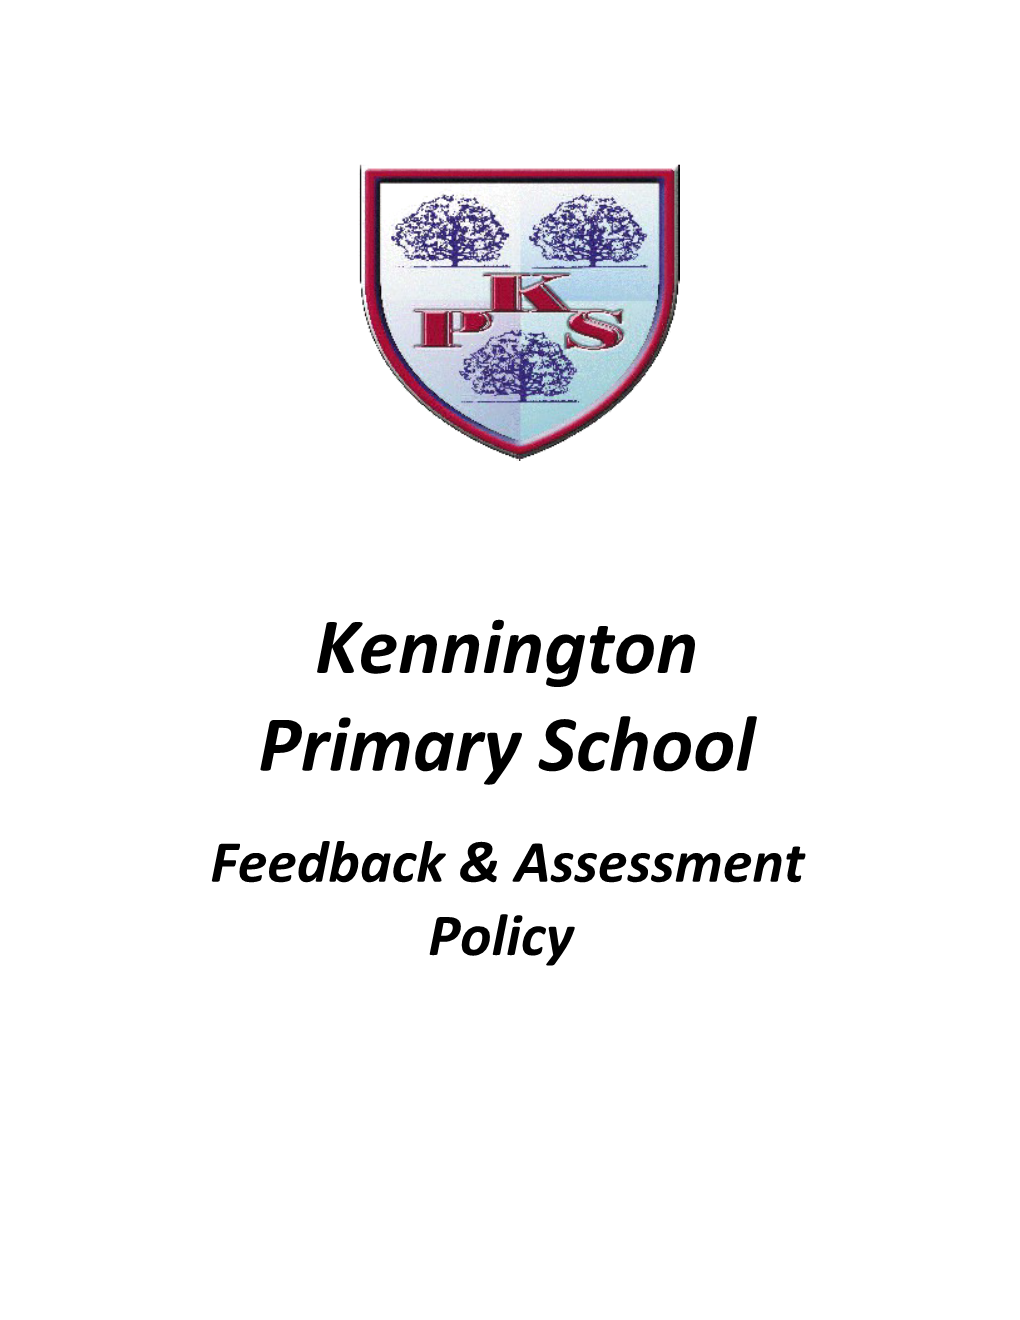 Feedback & Assessment Policy